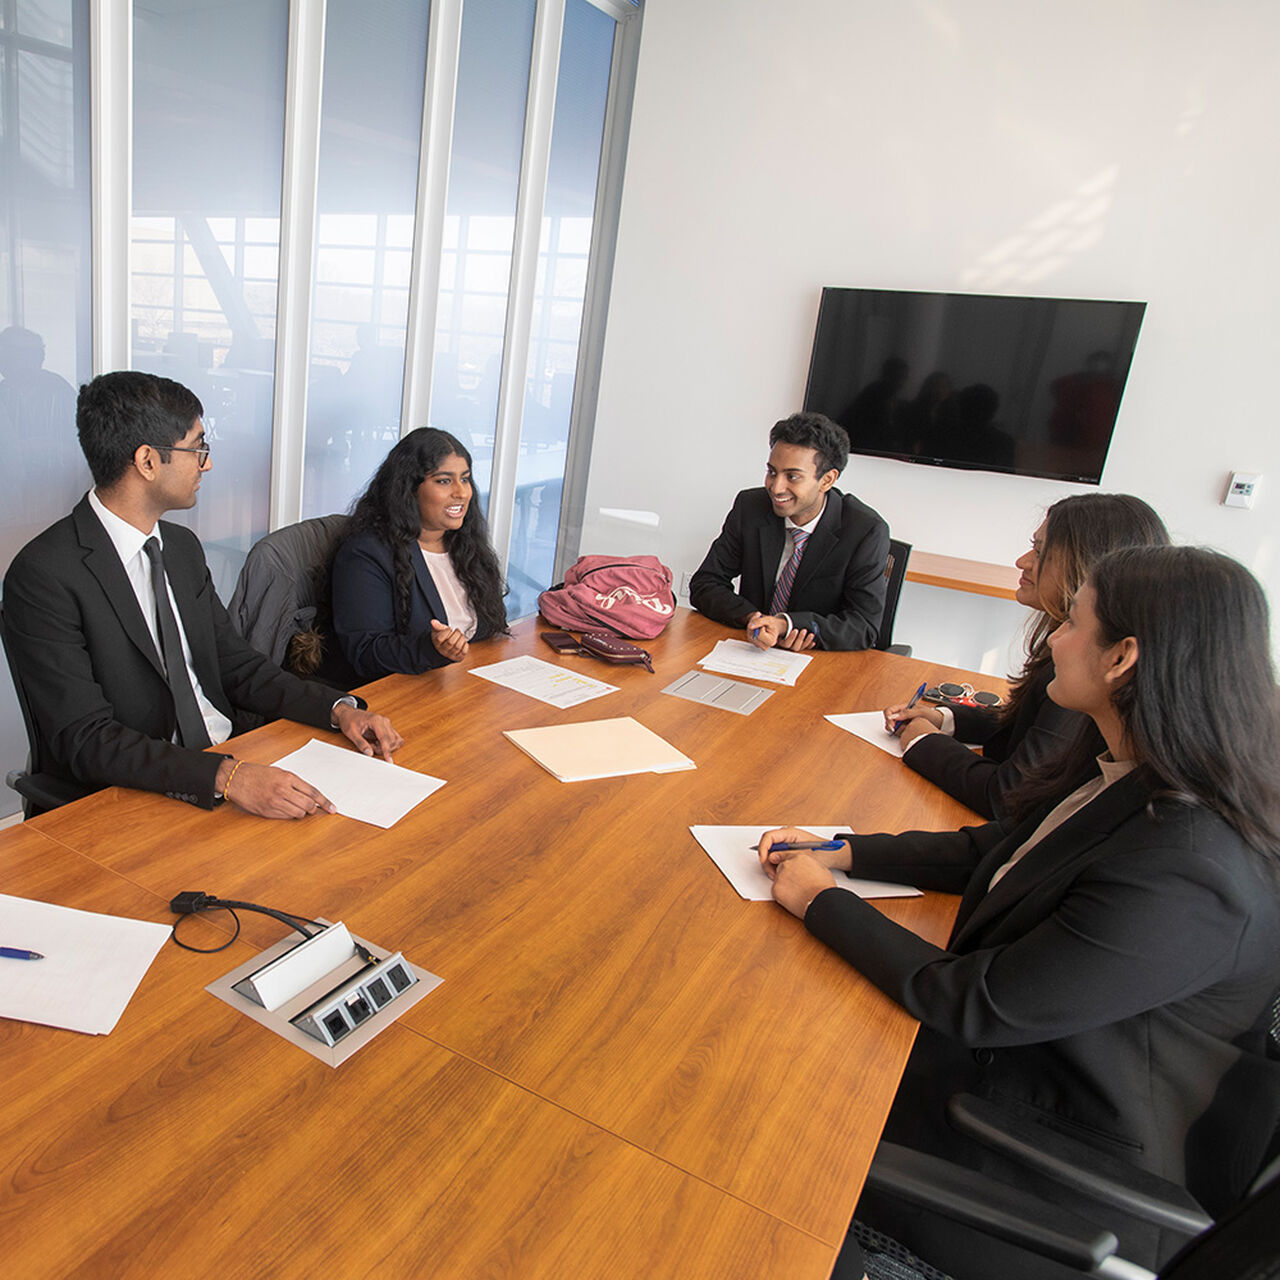 Students around a boardroom table image number 0